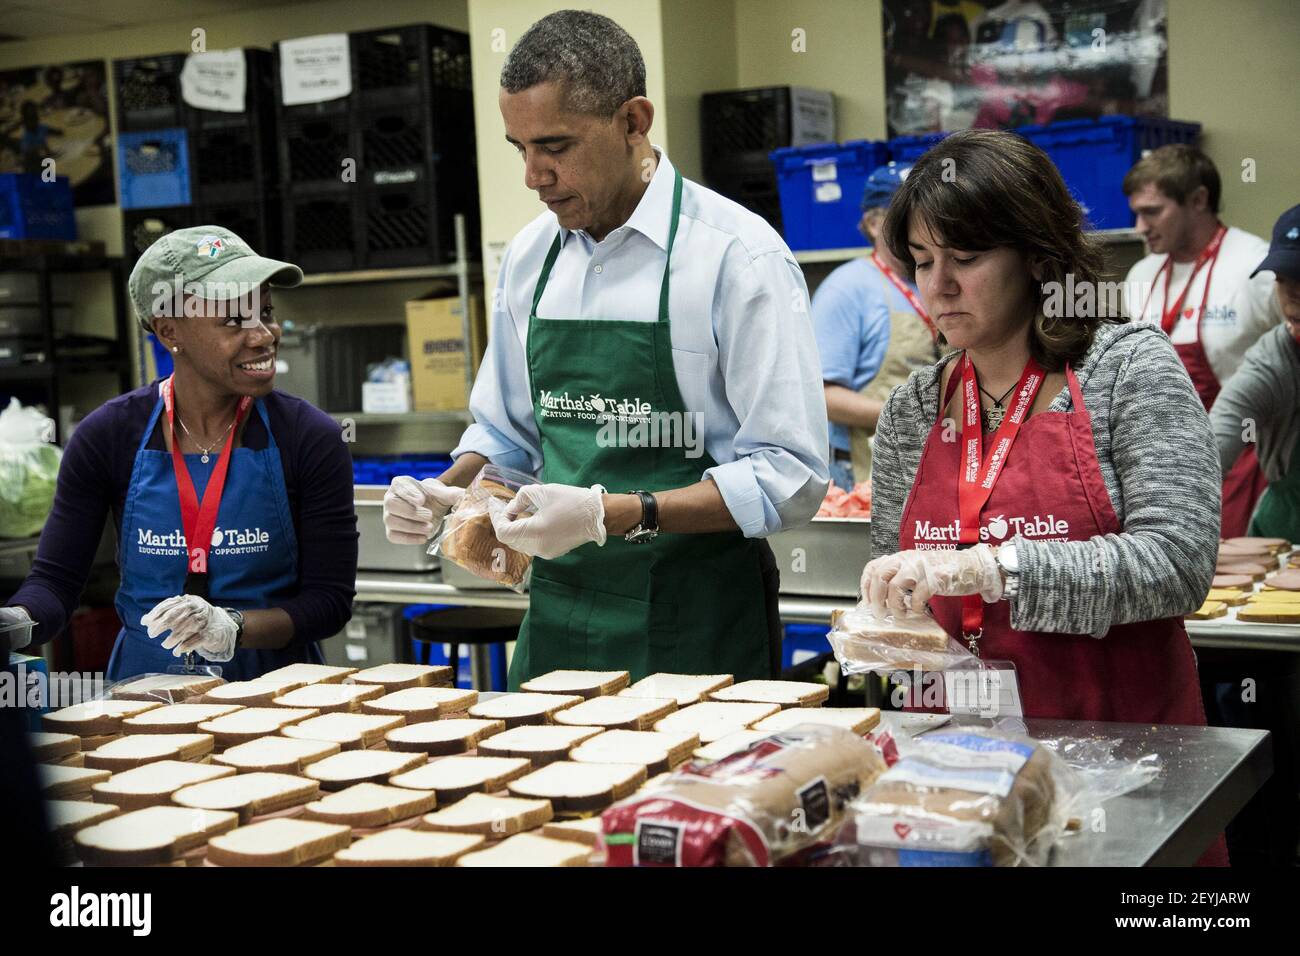 President Barack Obama helps bag sandwiches with furloughed federal  workers, including Dolly Garcia, right, who works at the U.S. Census  Bureau, and Chantelle Burton, left, who works at the Health and Human